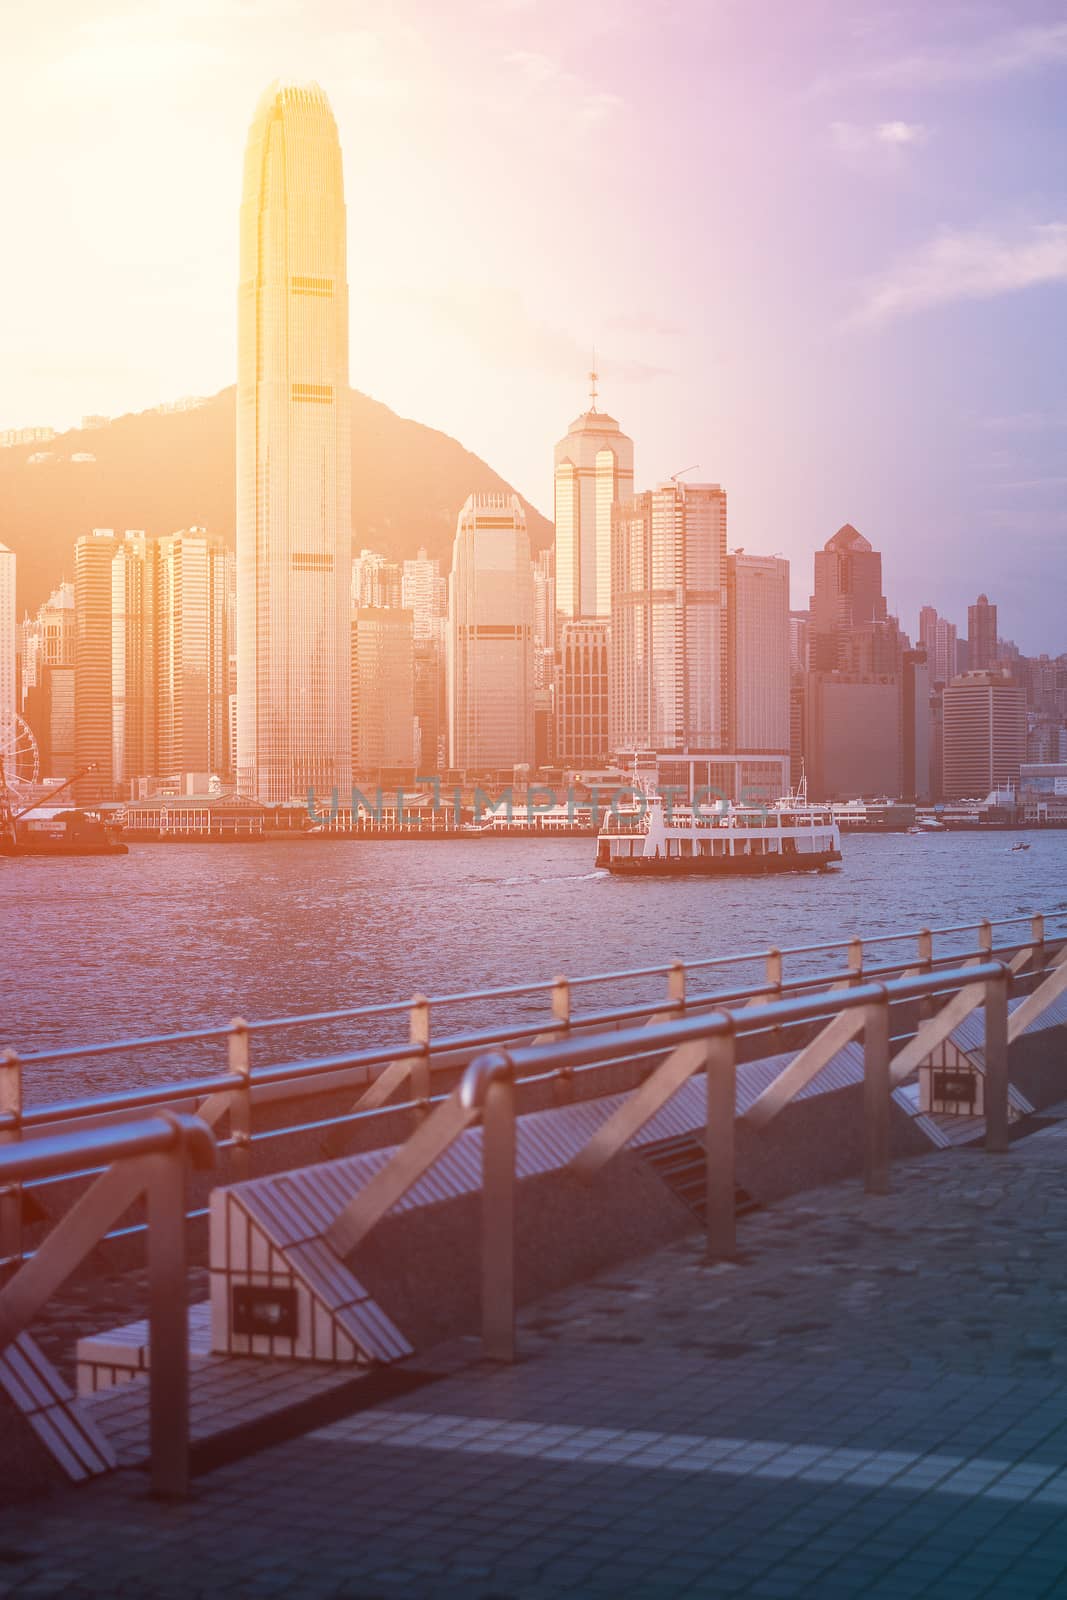 Hong Kong's Victoria Harbour in sunrise

 by Surasak